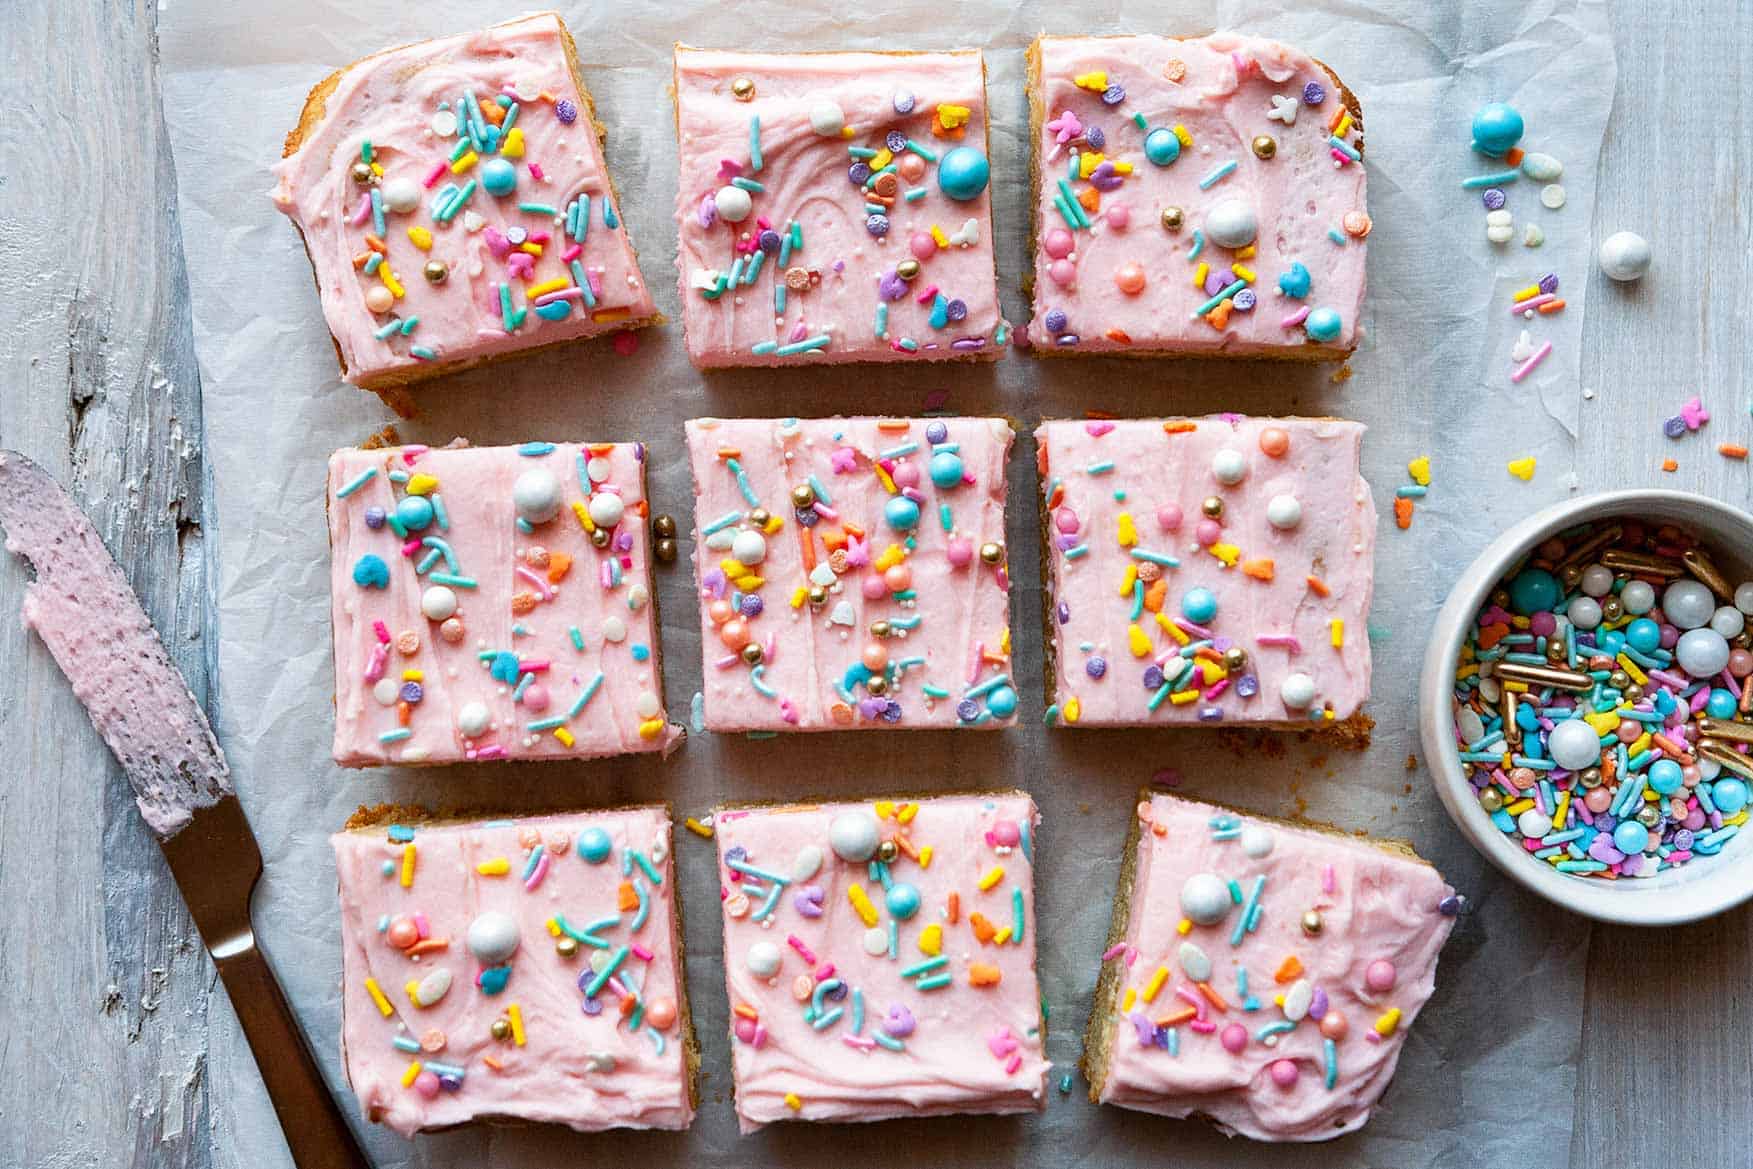 The BEST thick and chewy Sugar Cookie Bars with vanilla buttercream frosting. Quick and easy to make bar cookies recipe! #dessert #homemade #fromscratch